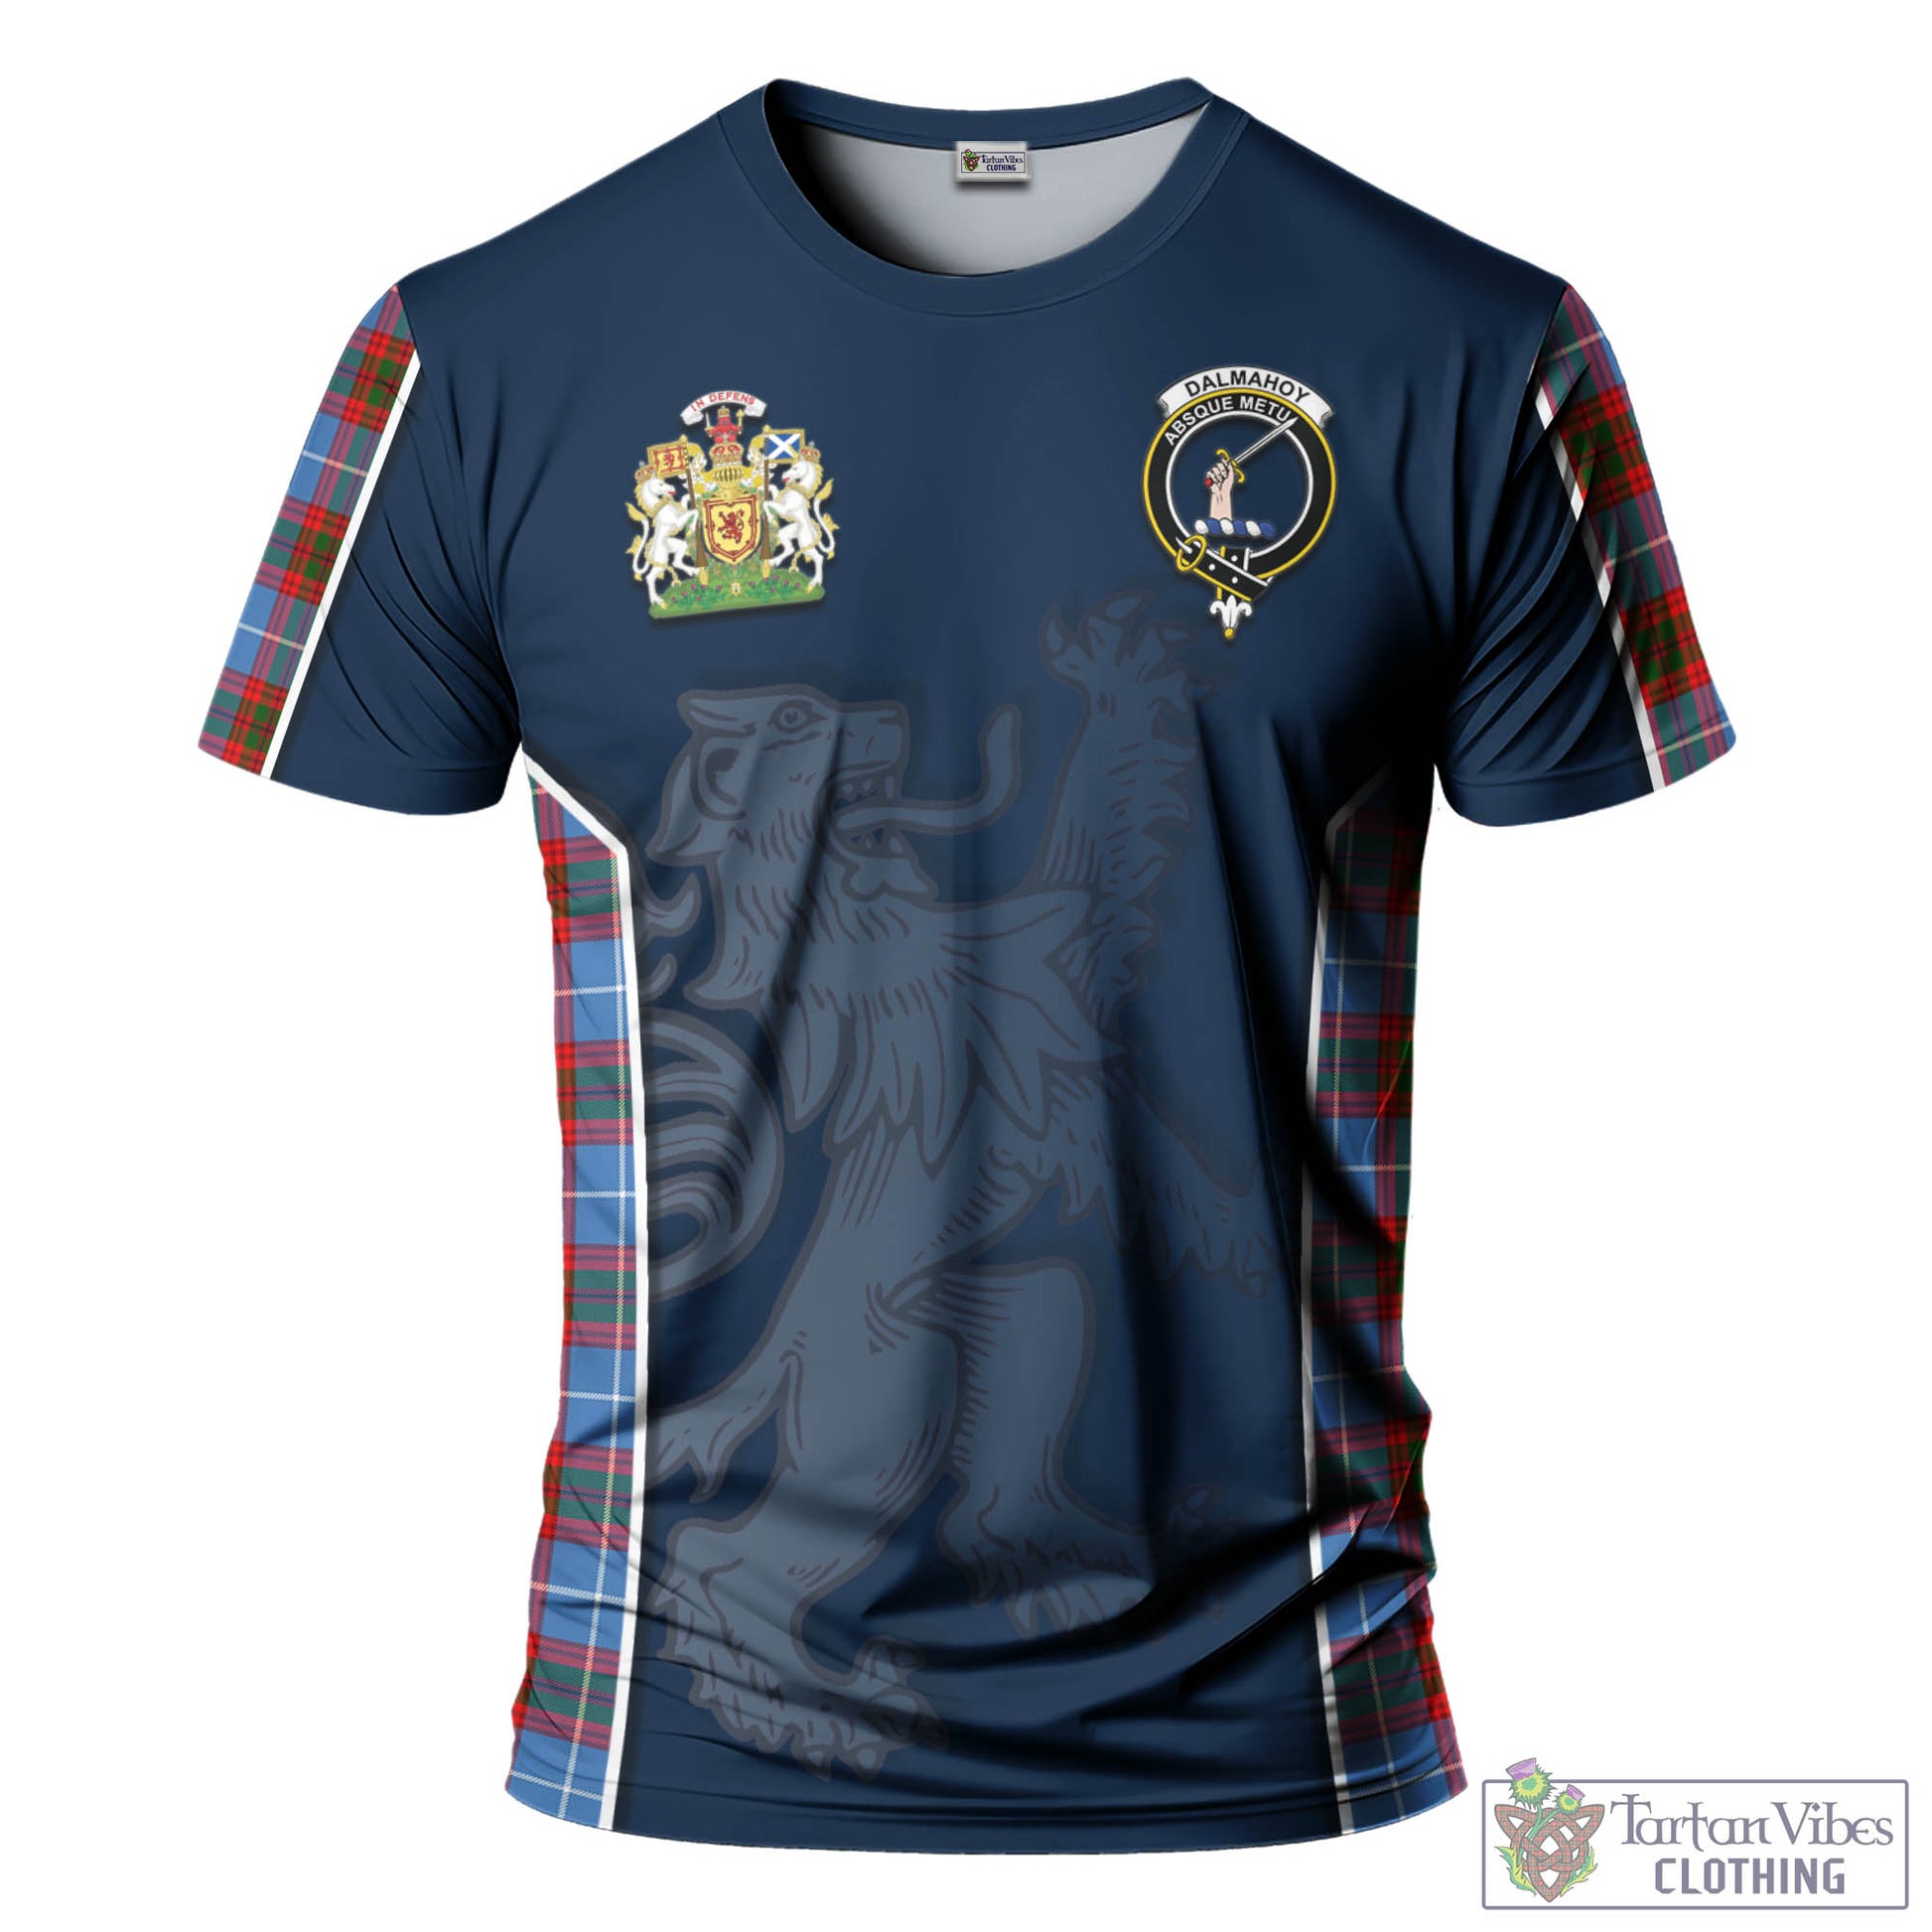 Tartan Vibes Clothing Dalmahoy Tartan T-Shirt with Family Crest and Lion Rampant Vibes Sport Style